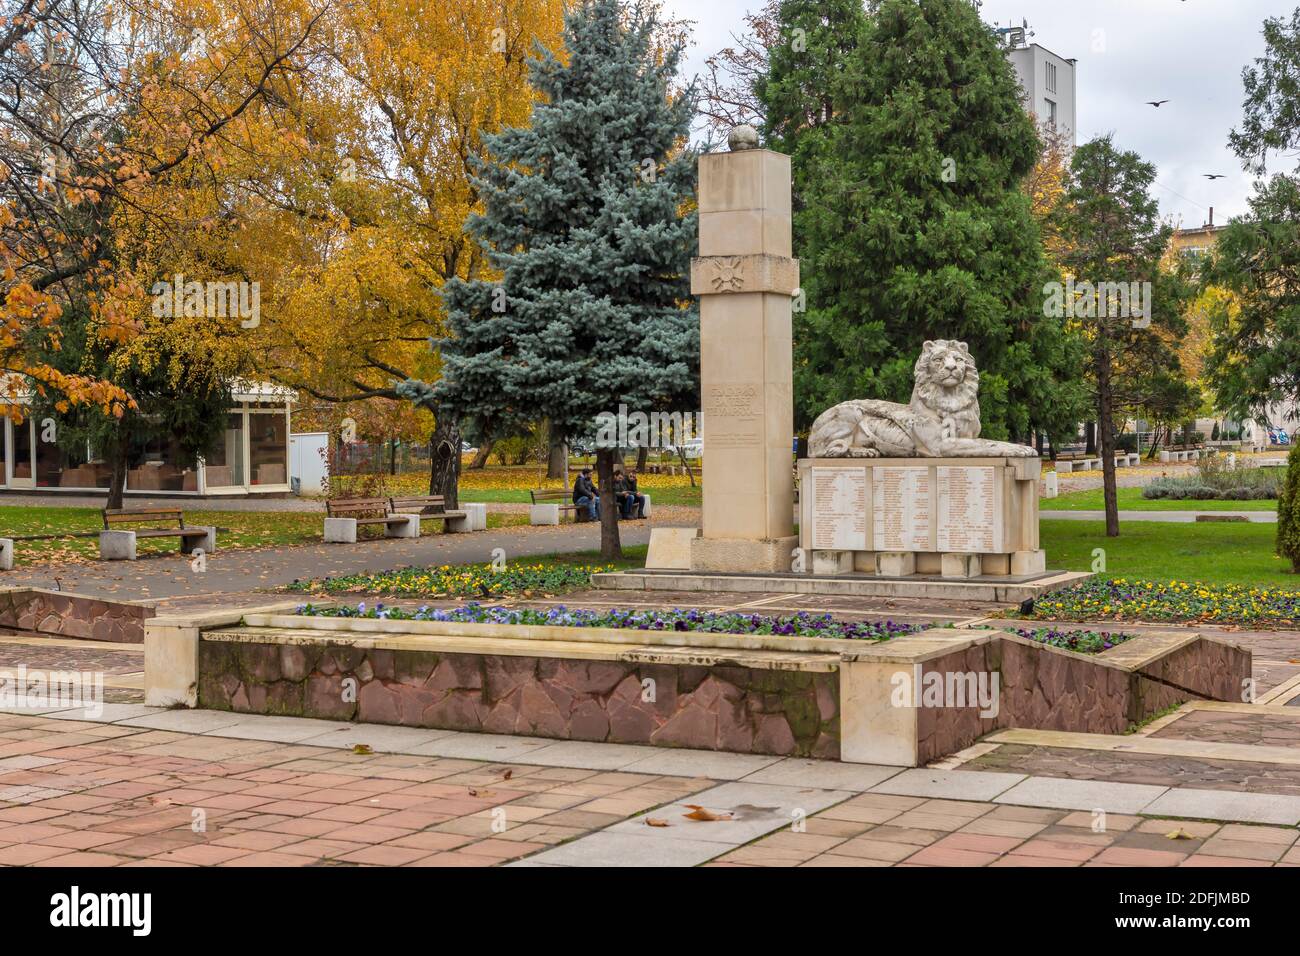 Montana Bulgaria November 22 Typical Building And Street At The Center Of Town Of Montana Bulgaria Stock Photo Alamy